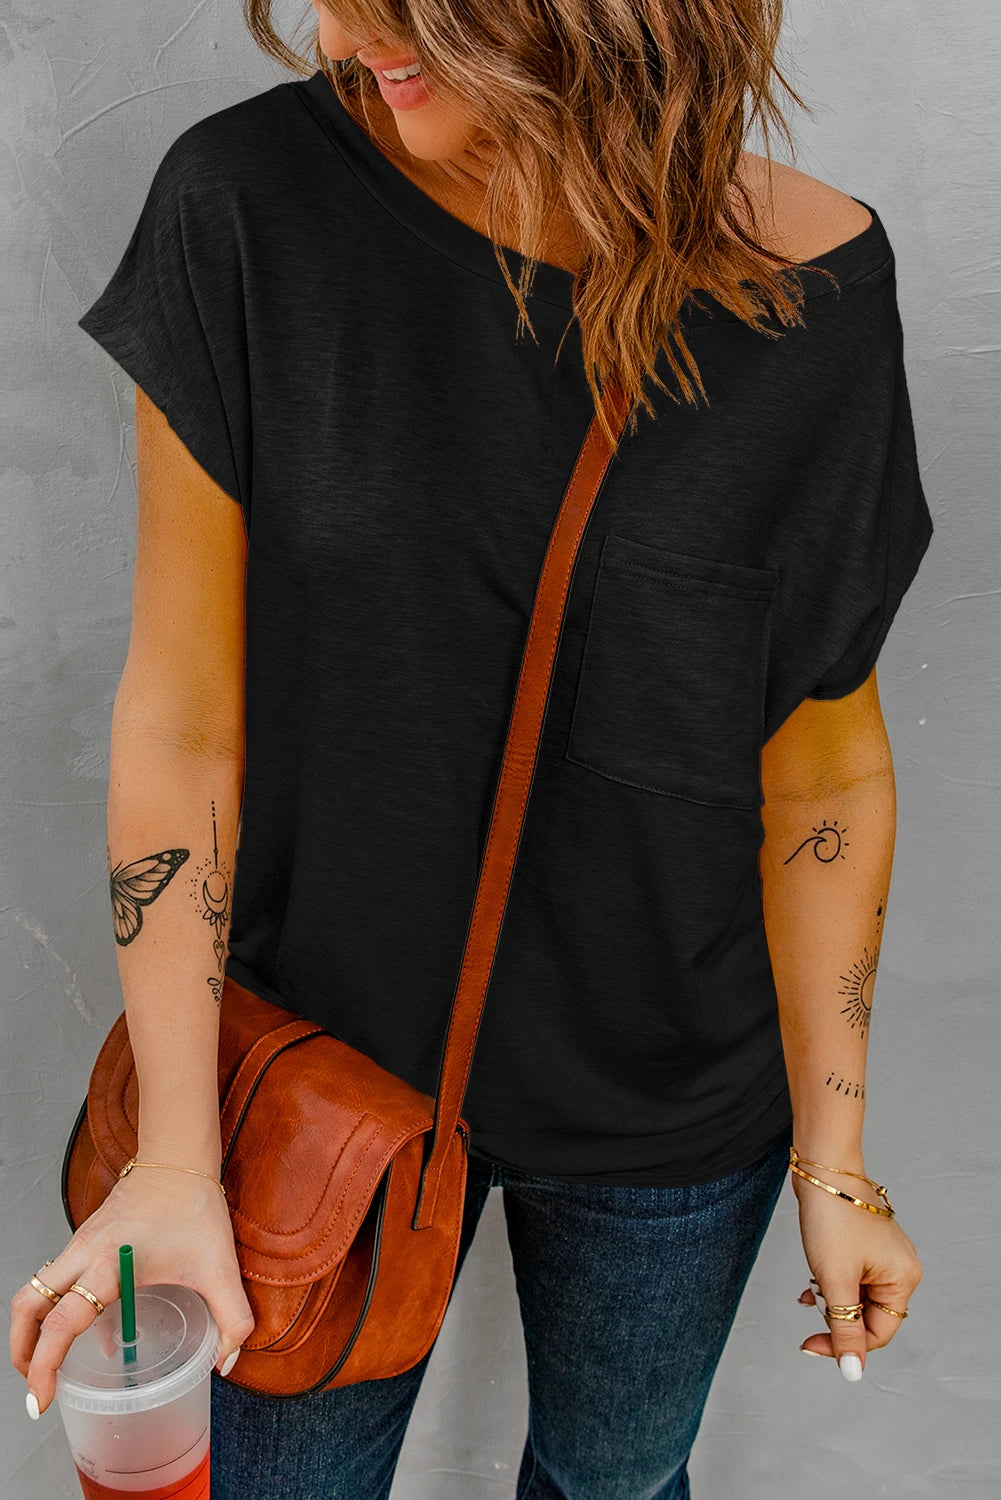 WOMAN WEARING PLUS SIZE BLACK T-SHIRT WITH POCKET